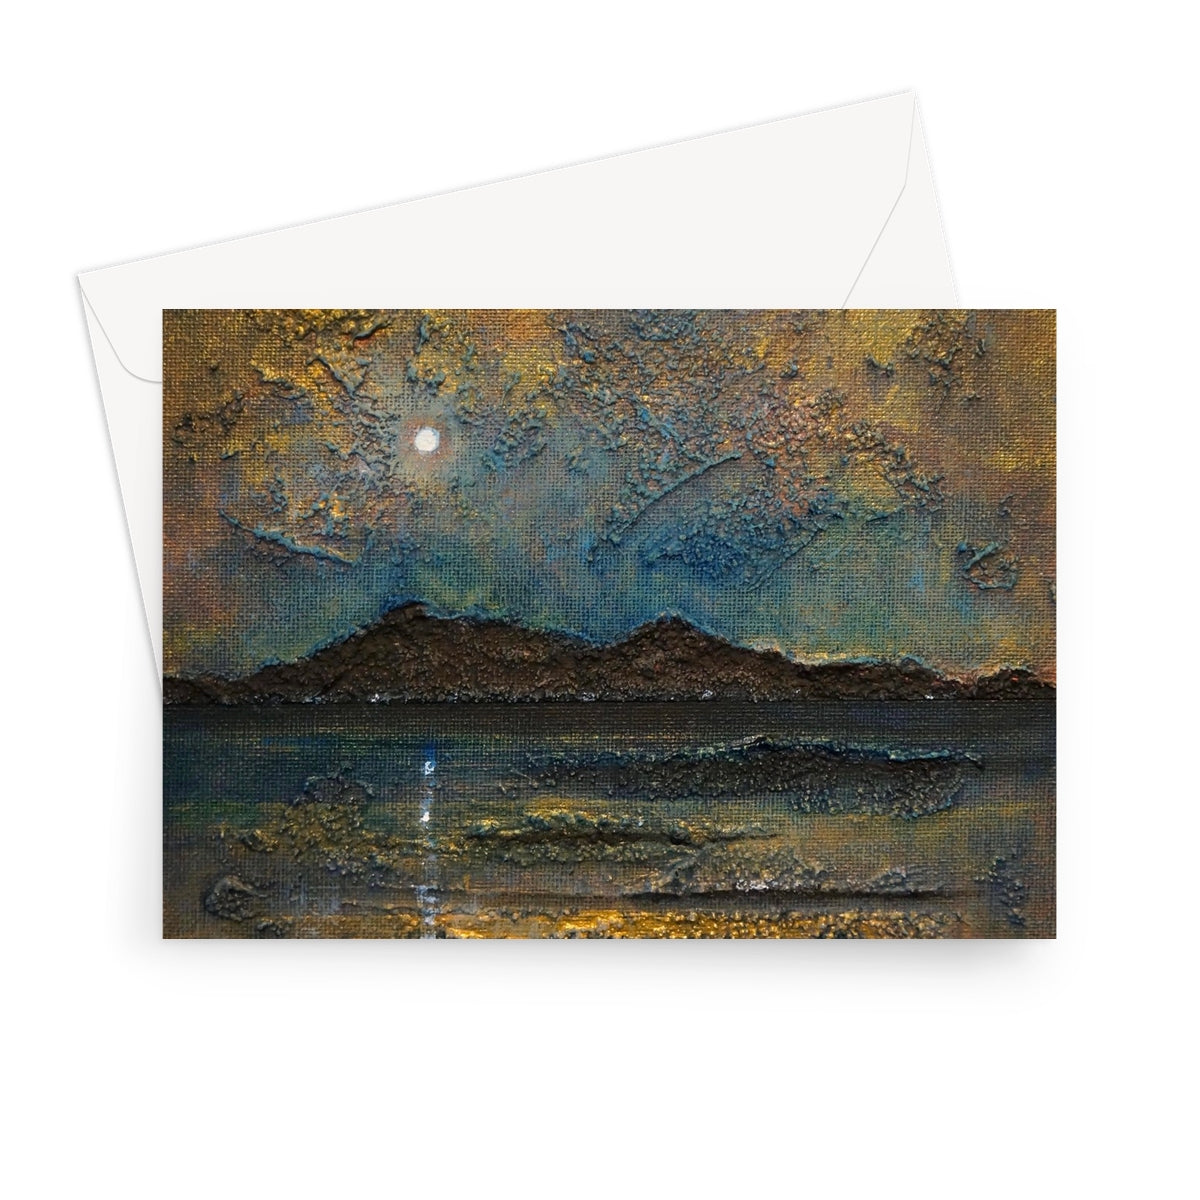 Arran Moonlight Art Gifts Greeting Card-Greetings Cards-Arran Art Gallery-7"x5"-1 Card-Paintings, Prints, Homeware, Art Gifts From Scotland By Scottish Artist Kevin Hunter